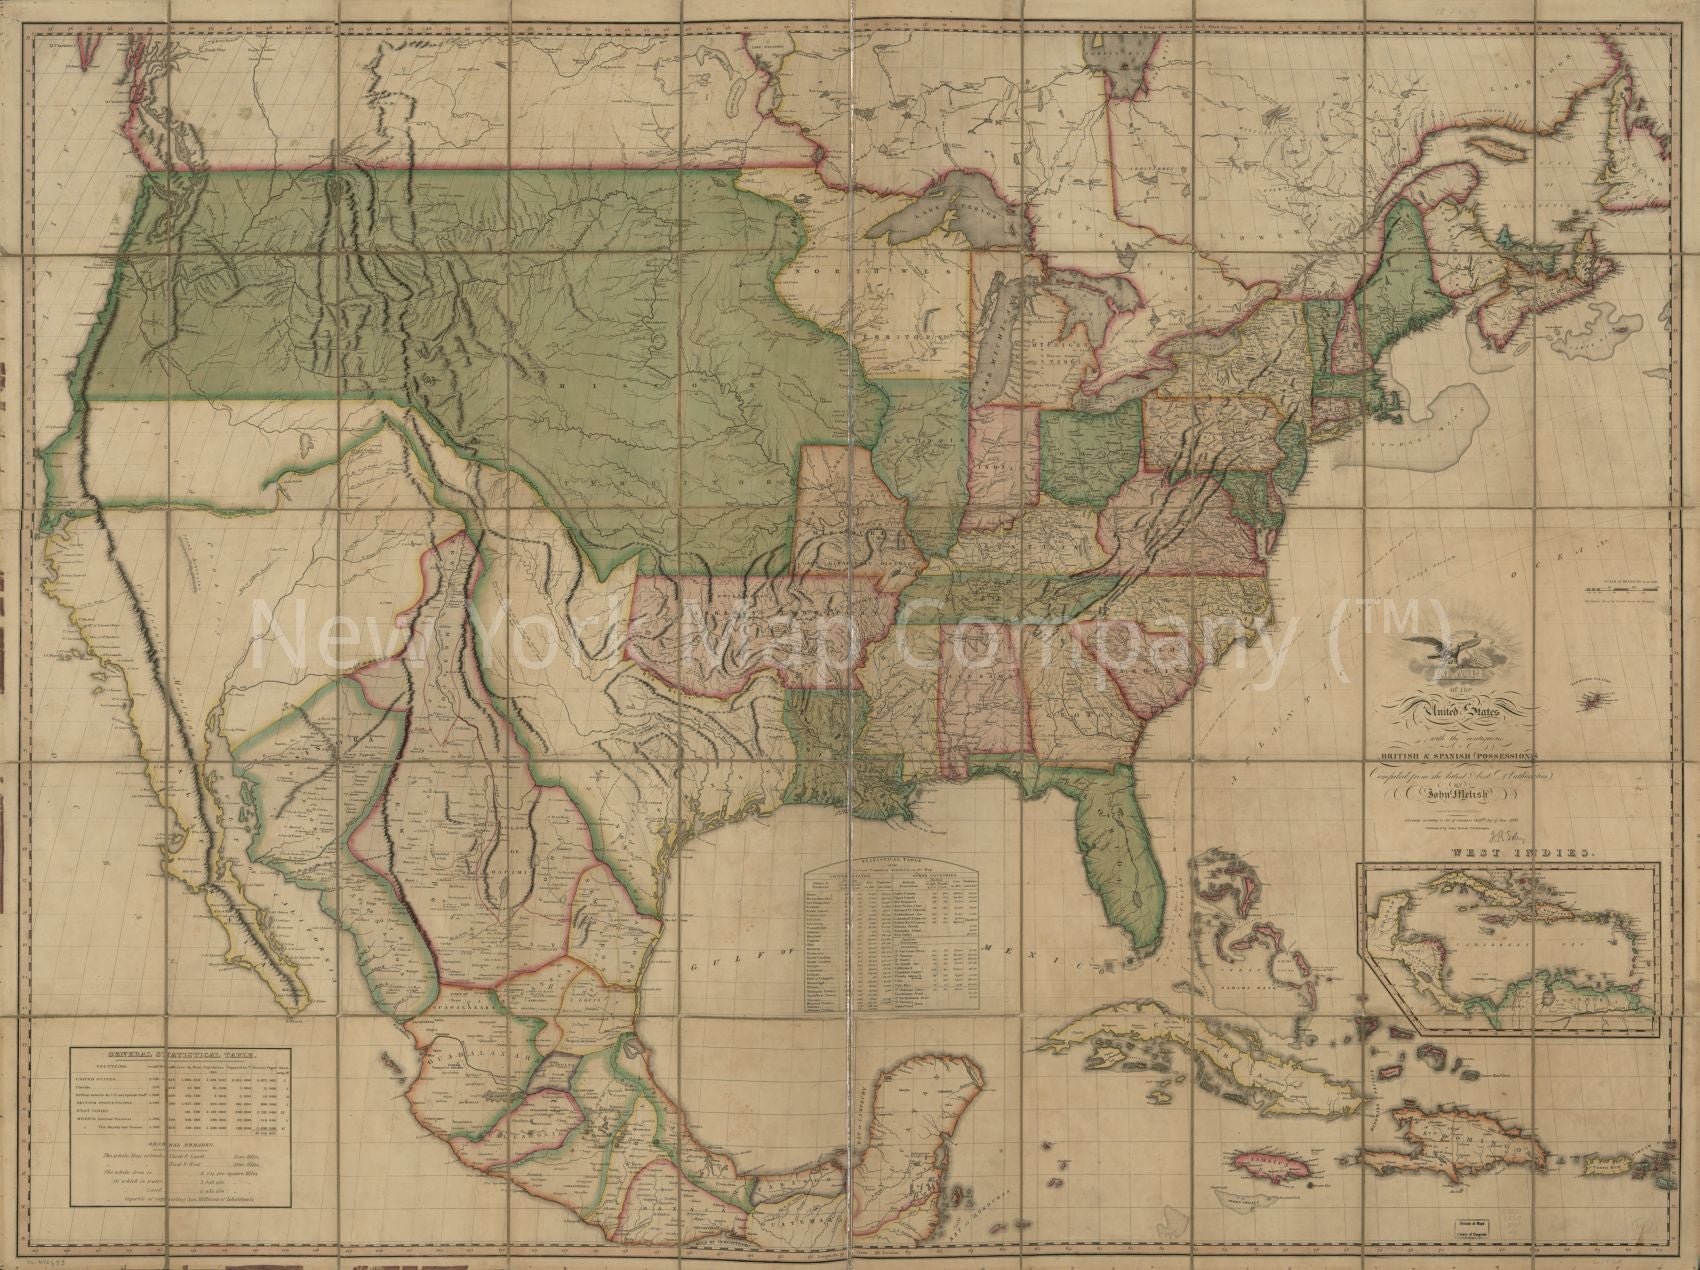 1820 map of the United States of America: with the contiguous British and Spanish possessions. Map Subjects: